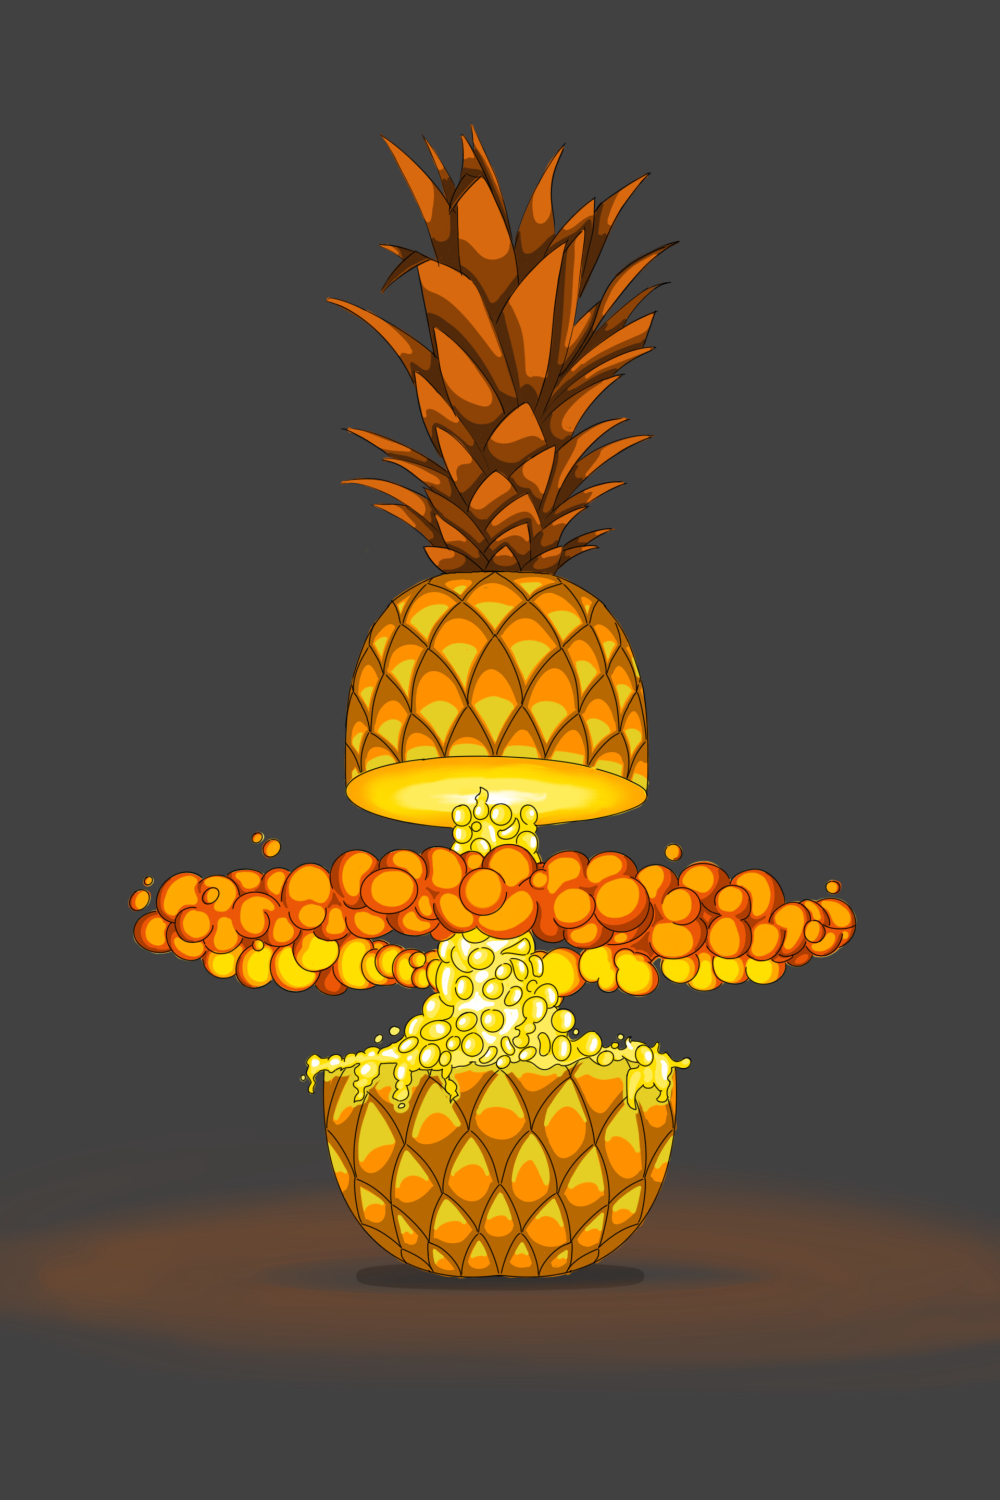 A Pineapple With A Bomb Inside